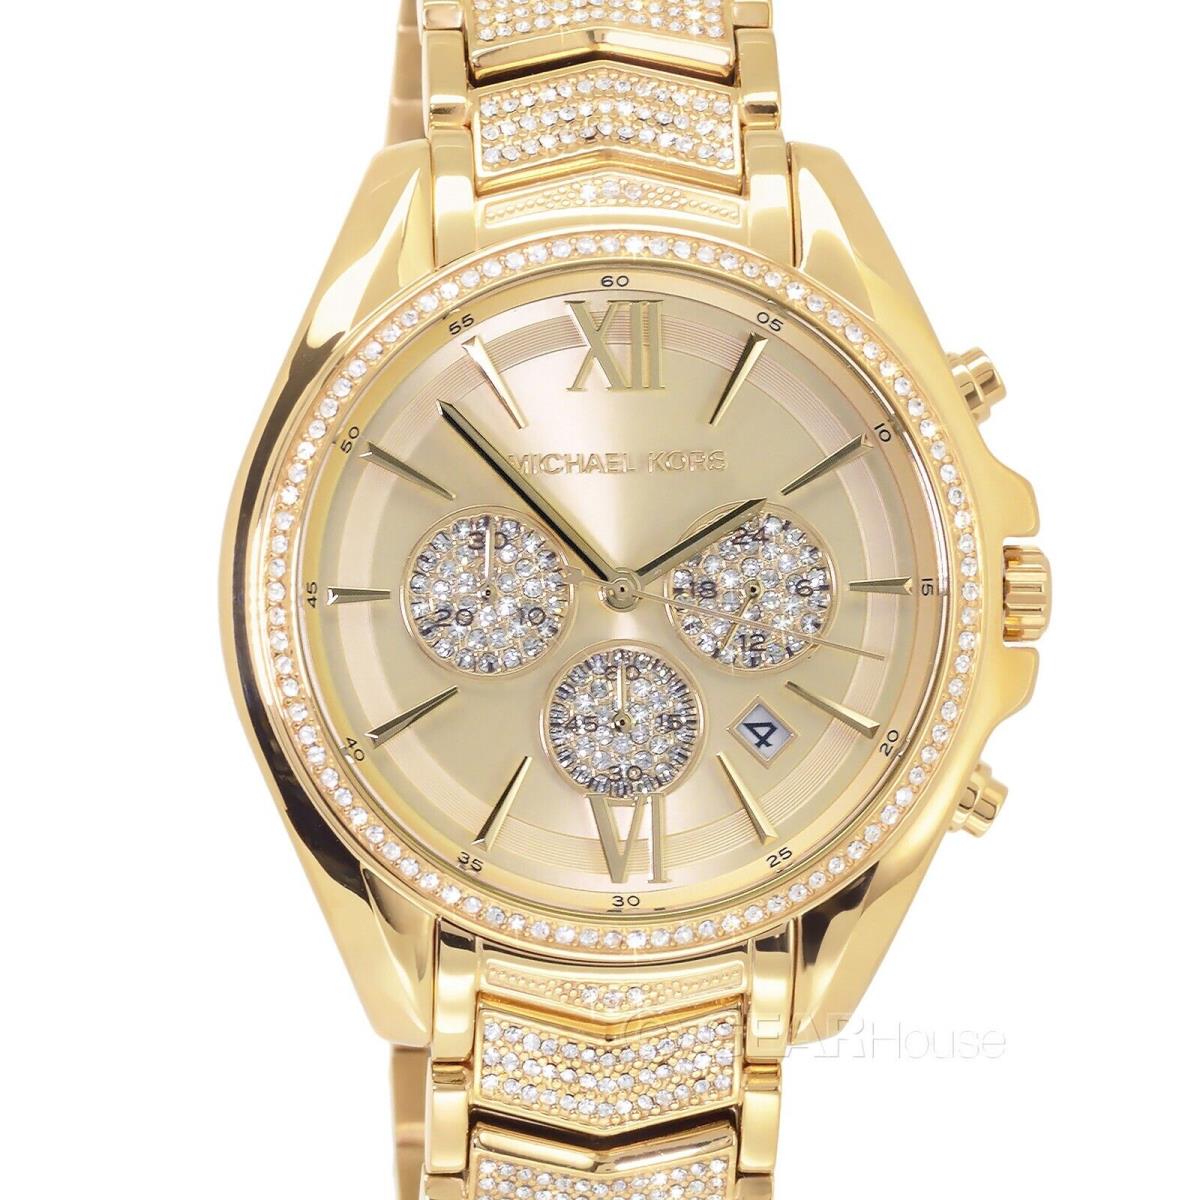 Michael Kors Oversized Whitney Womens Glitz Watch Gold Dial Chrono Pave Crystals - Dial: Gold, Band: Gold, Bezel: Gold